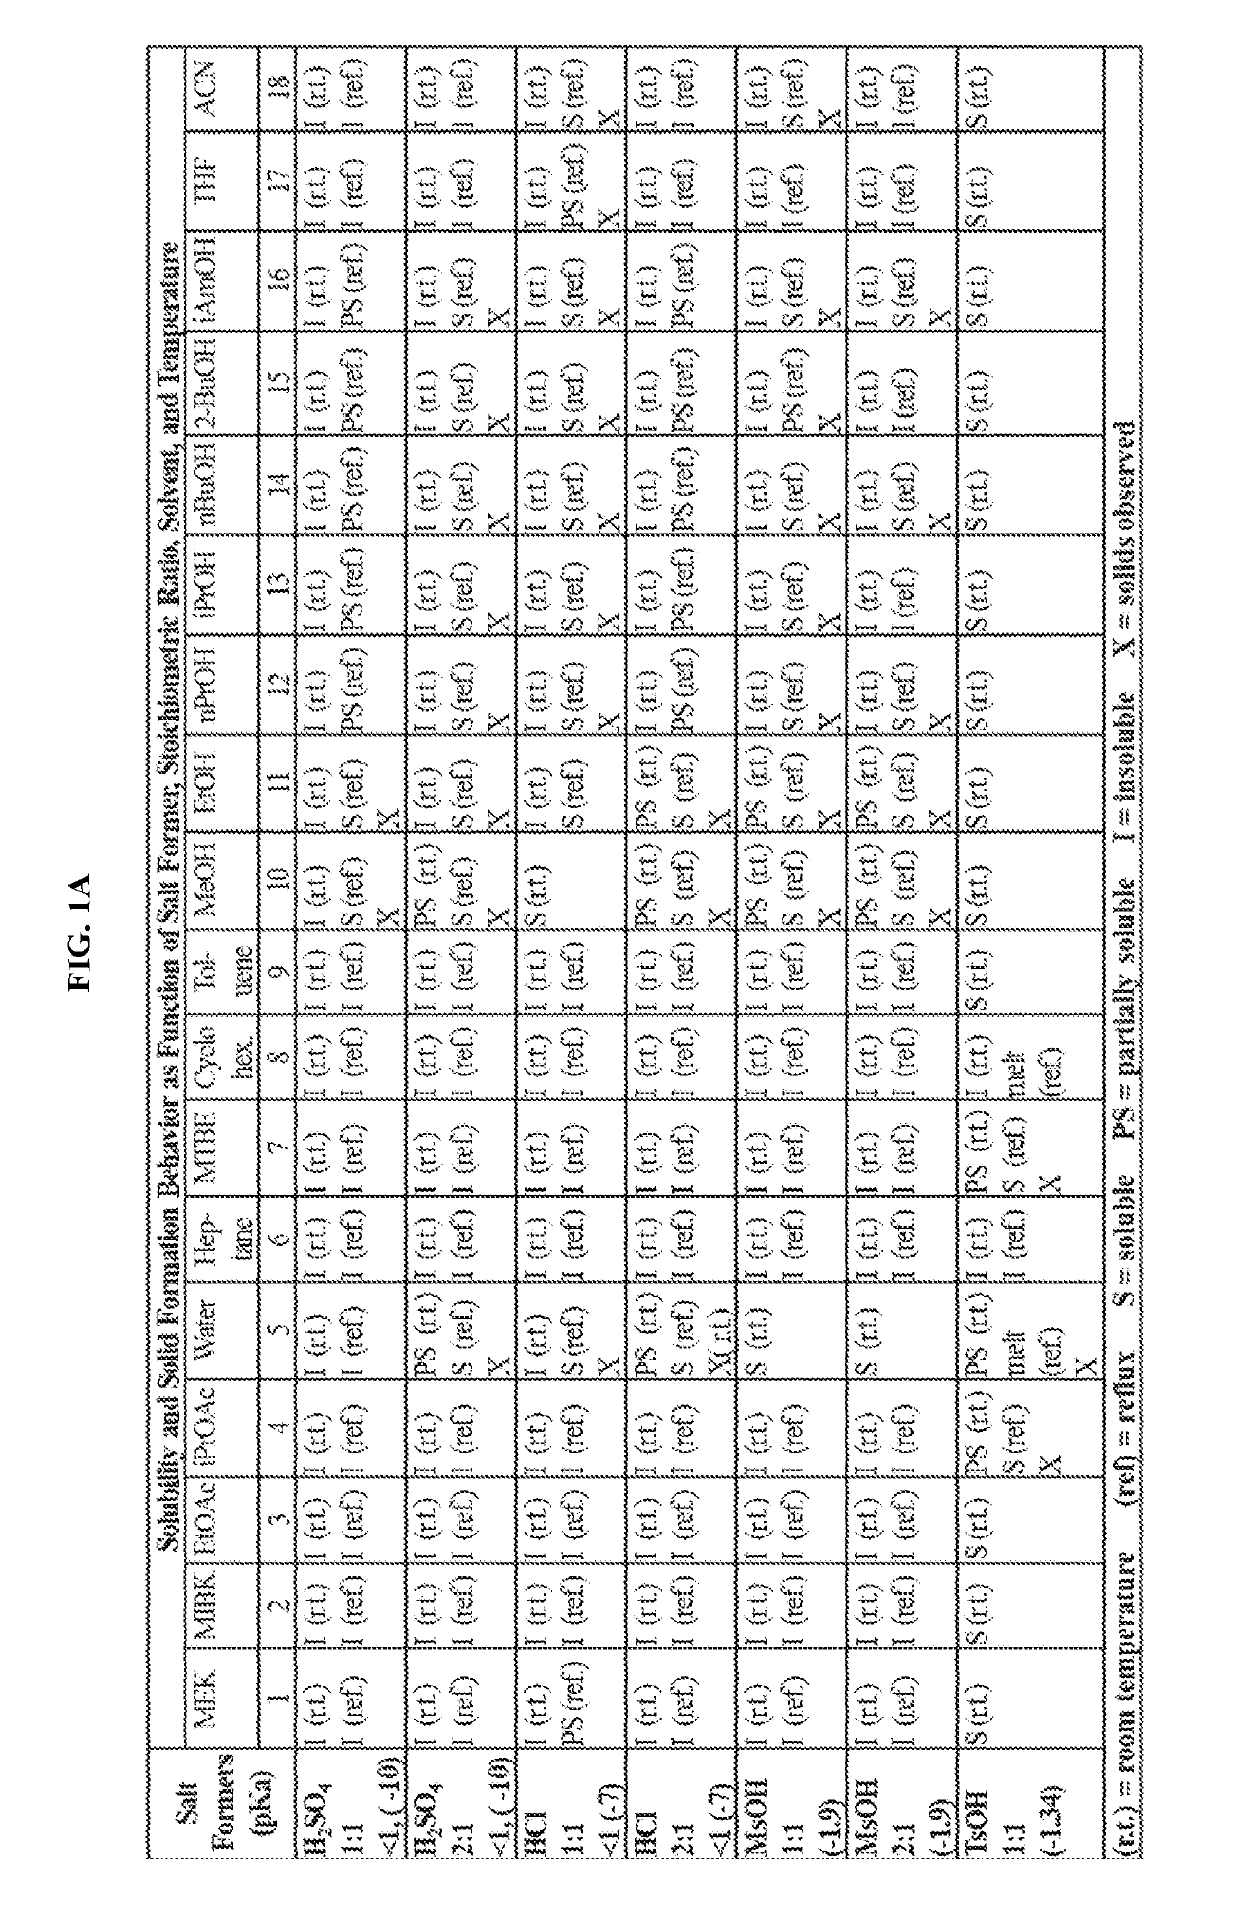 Breathing control modulating compounds, and methods of making and using same